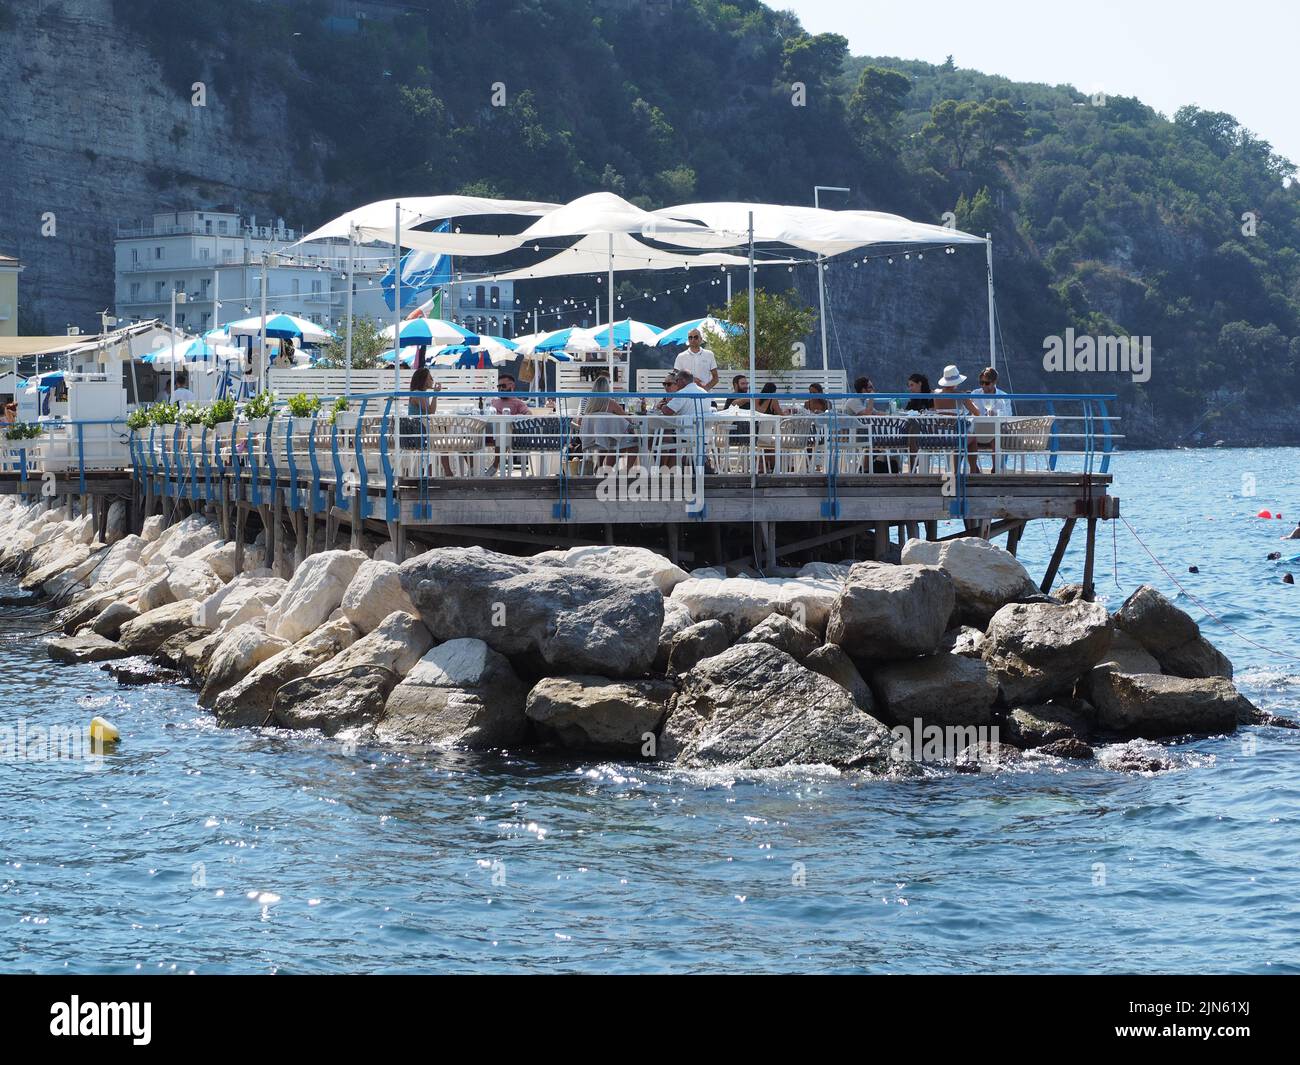 The coast is very rocky at Sorrento and there is no beach, so for enjoying the sea people use piers like this one in Marina Grande, Sorrento, Italy Stock Photo